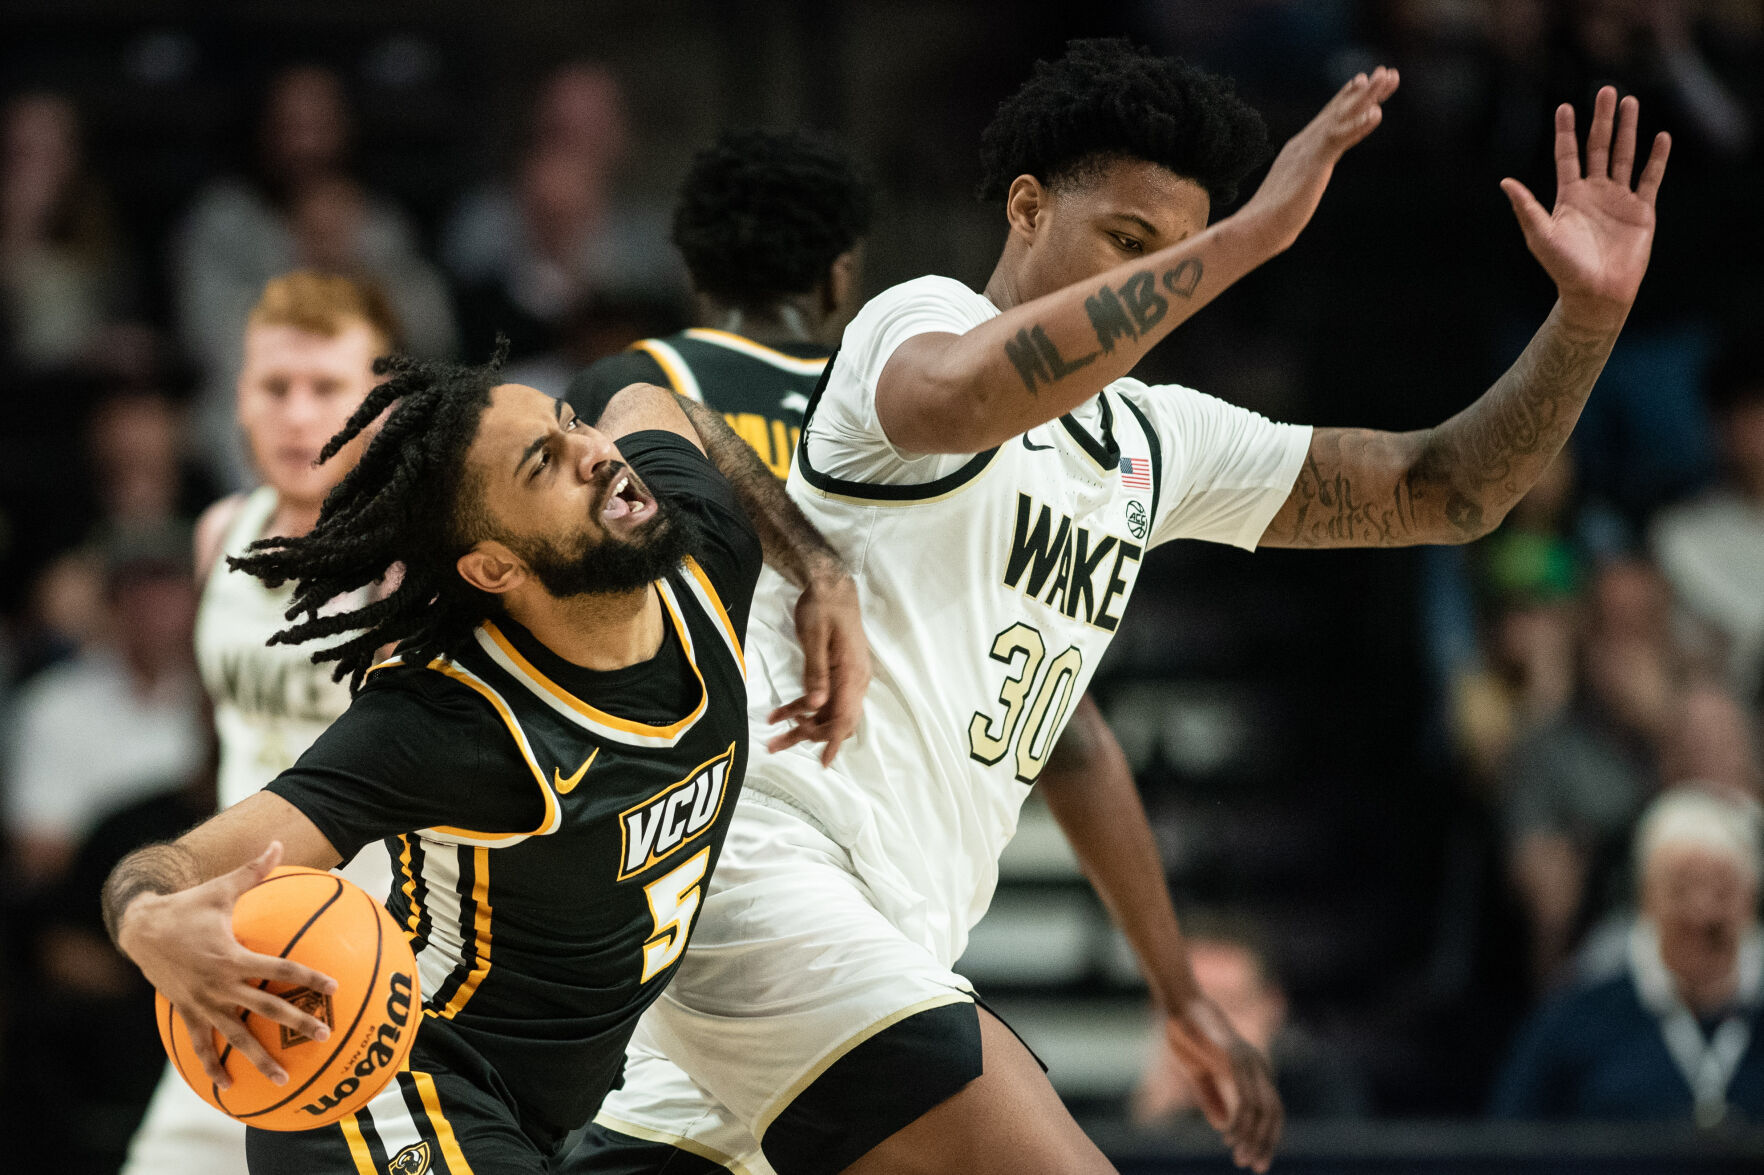 Deacons collect postseason validation with 80-74 win over VCU